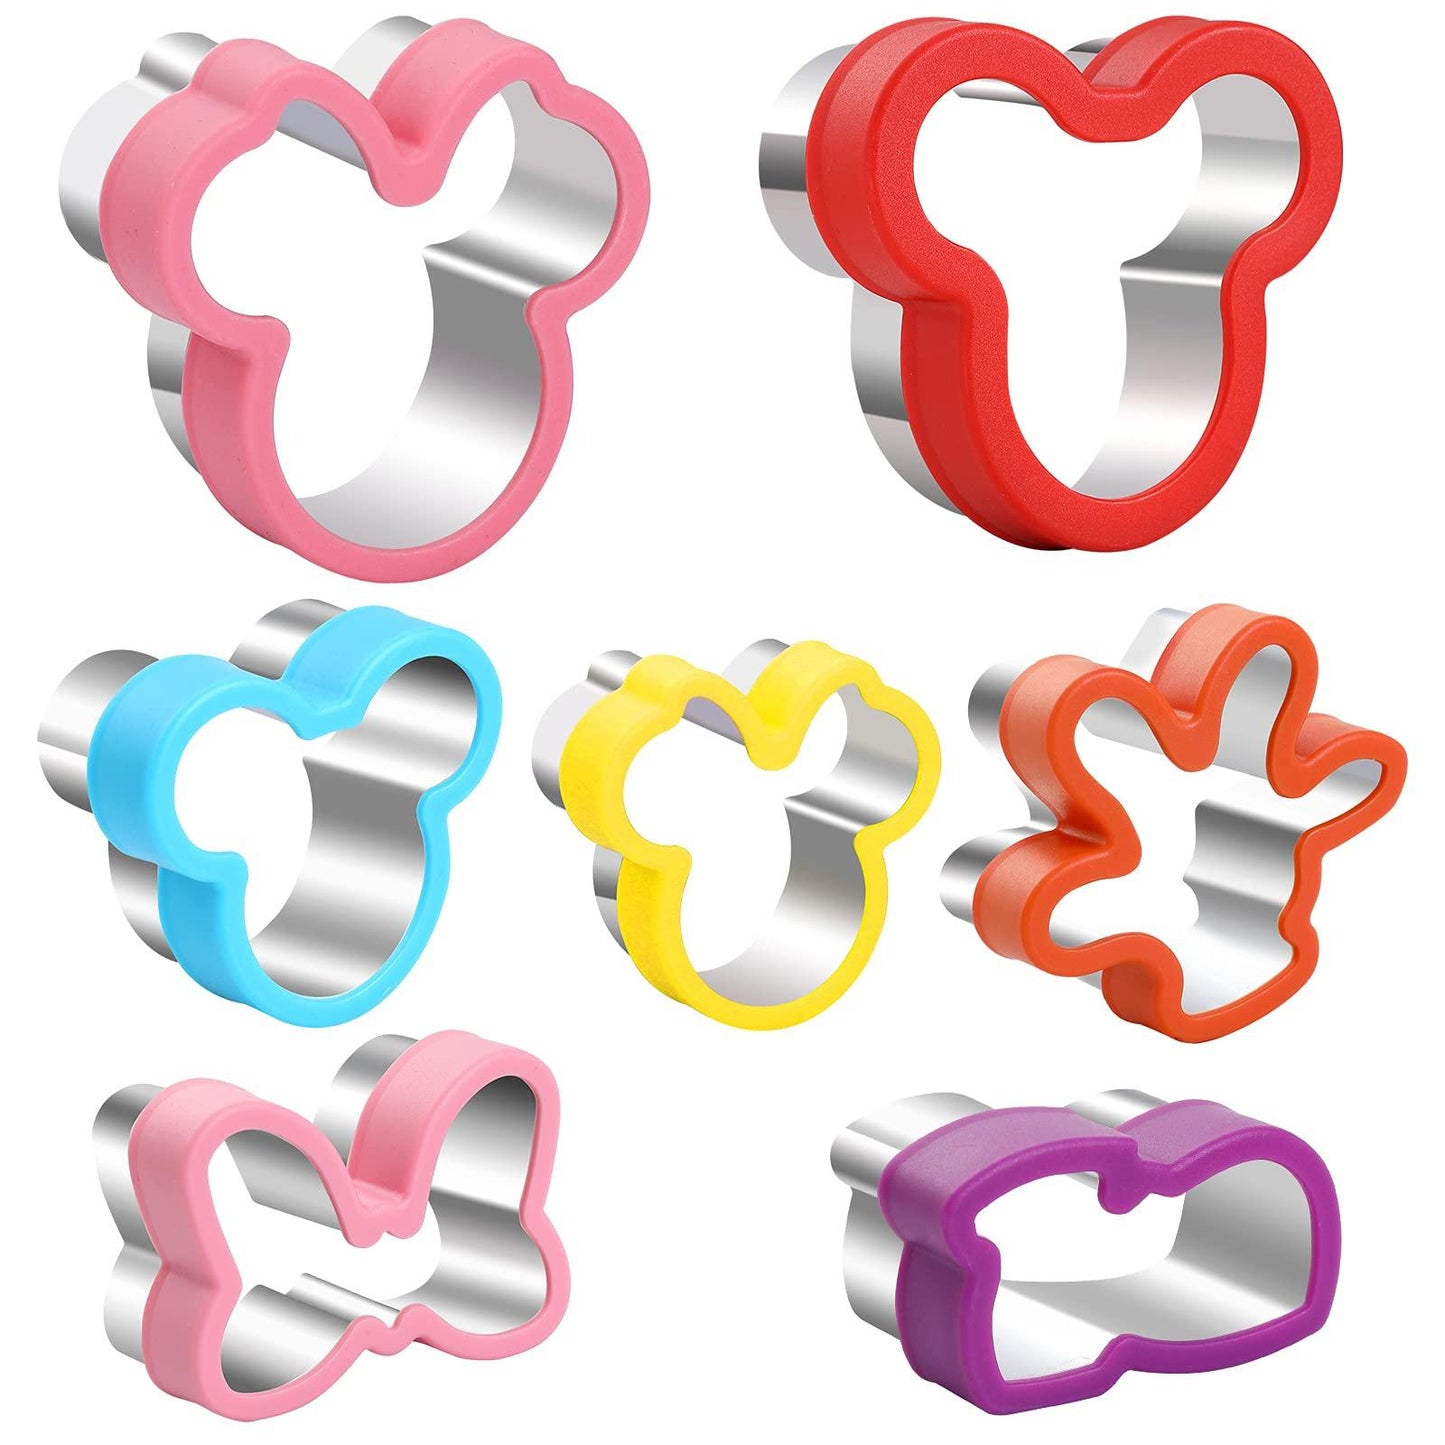 Cookie Cutter set, Head, Glove, Shoe, Bows Shapes Sandwich Cutters Cookie Cutters -Food Grade Cookie Cutter Mold for Kids (7Pack) - CookCave